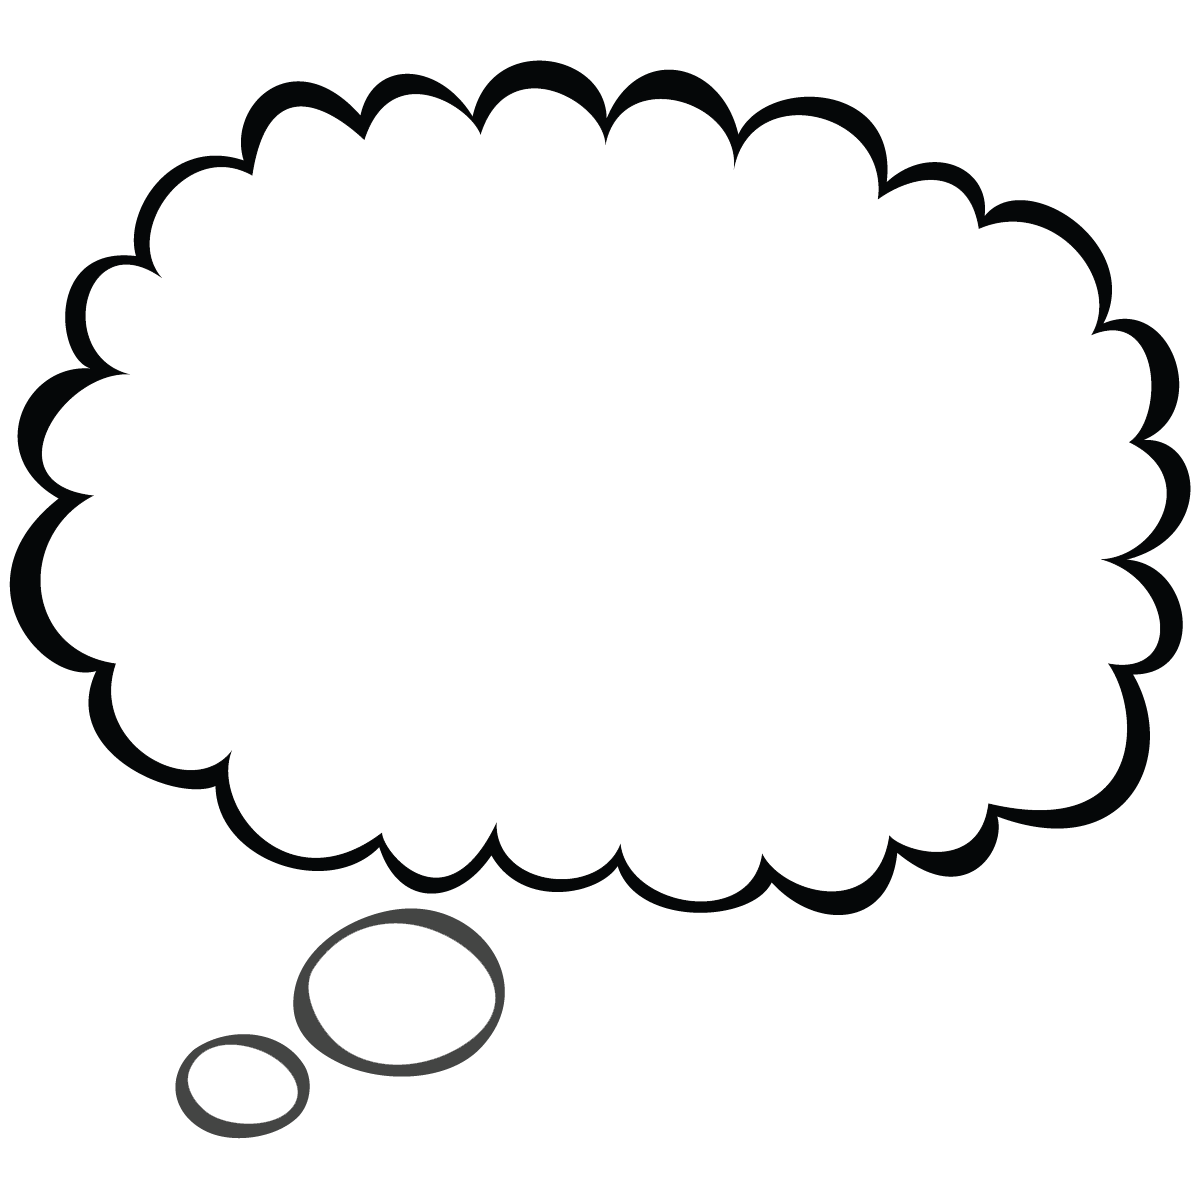 Thinking Bubble Png